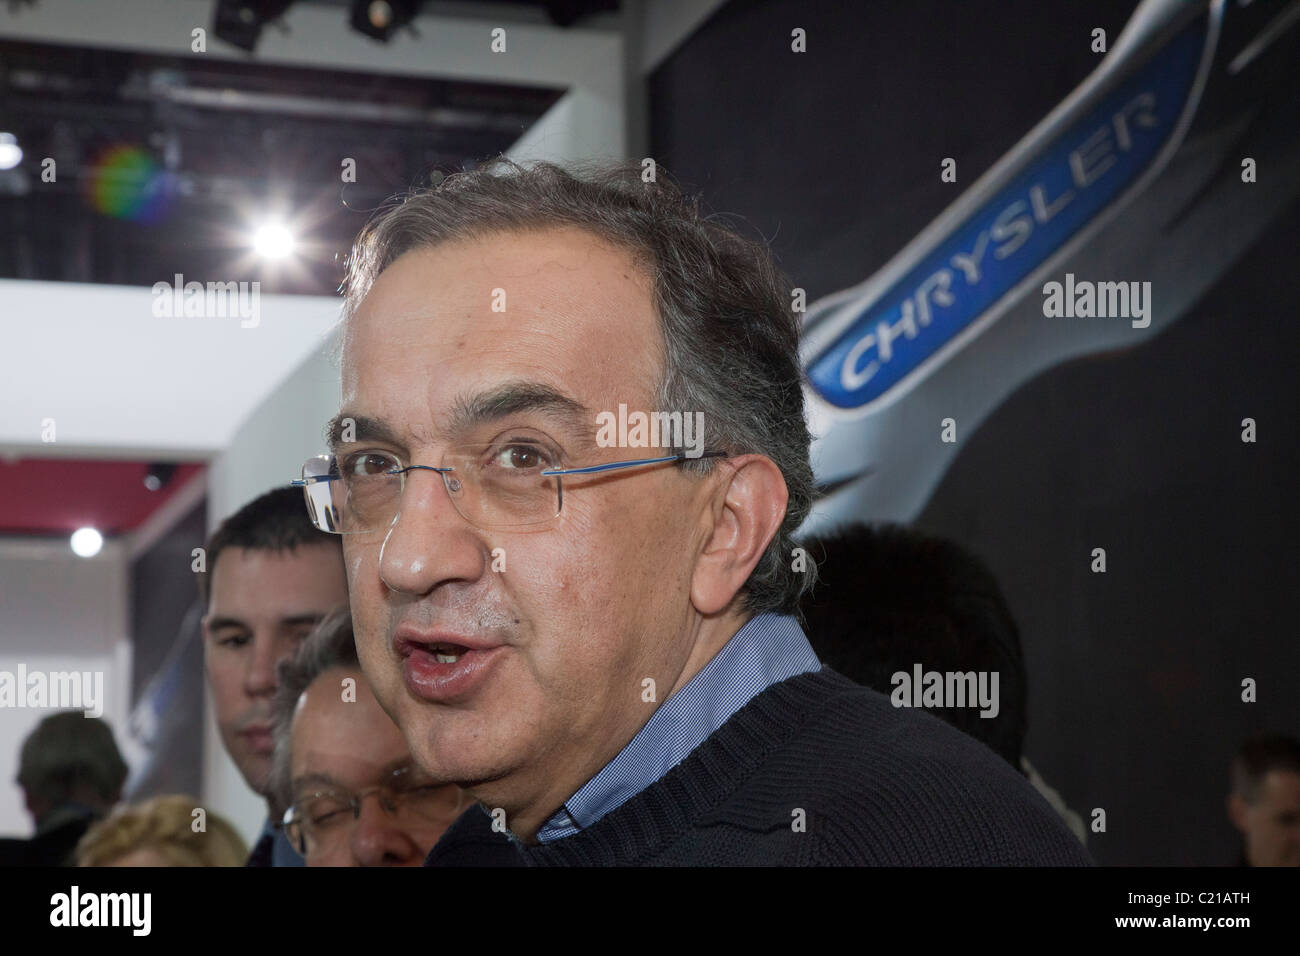 Detroit, Michigan - Sergio Marchionne, CEO of Fiat and Chrysler, at the North American International Auto Show. Stock Photo